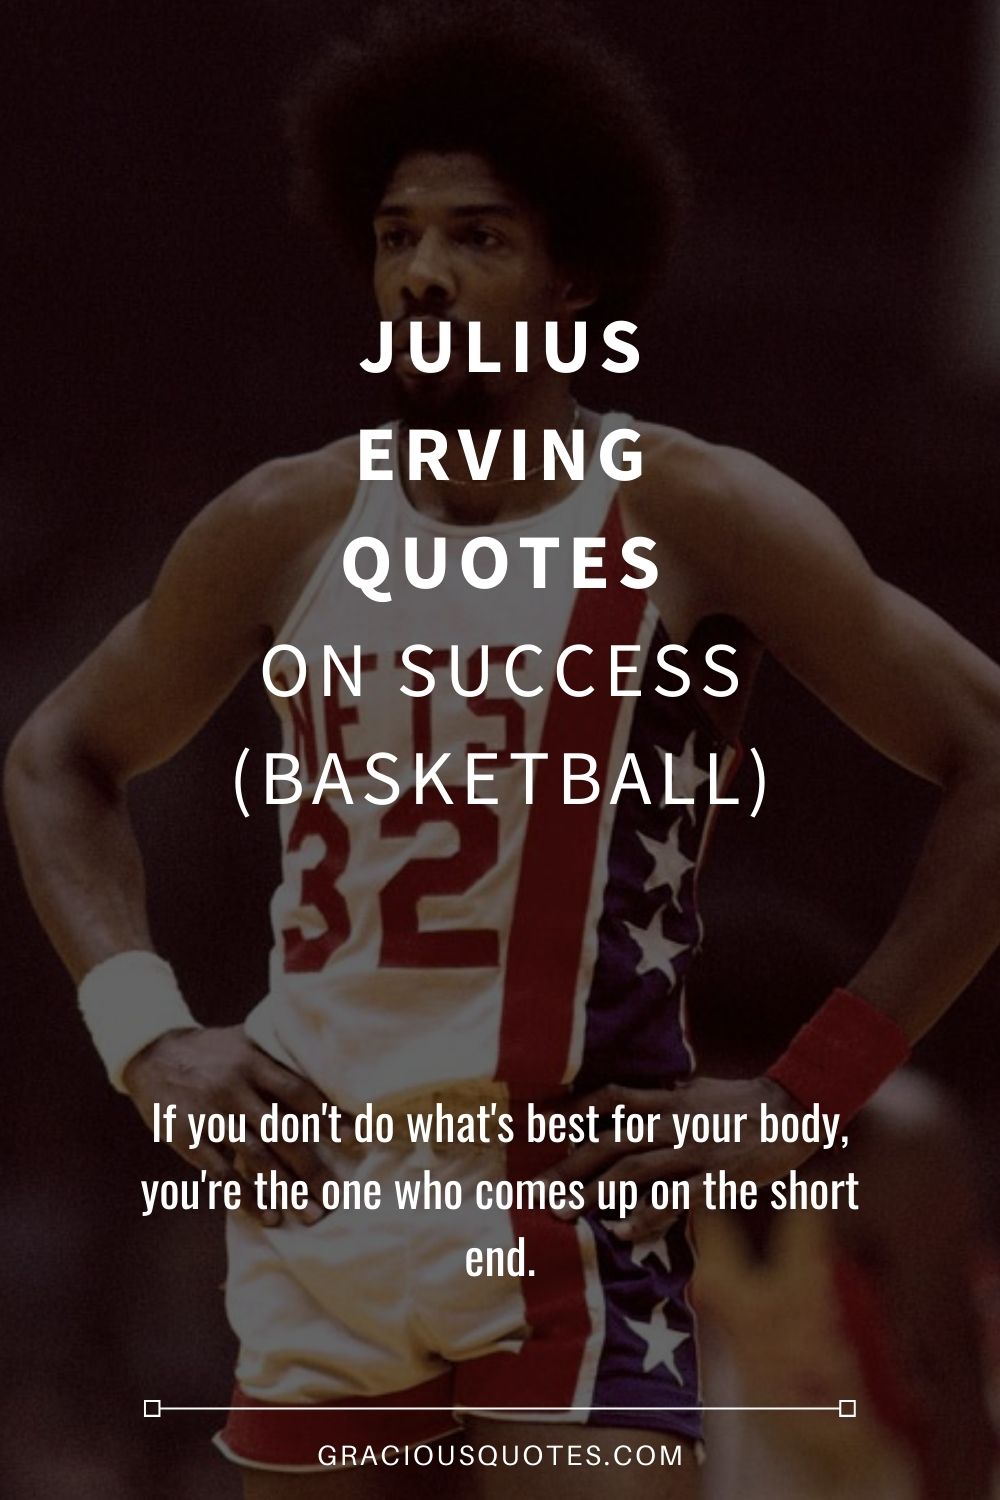 Julius Erving Quotes on Success (BASKETBALL) - Gracious Quotes